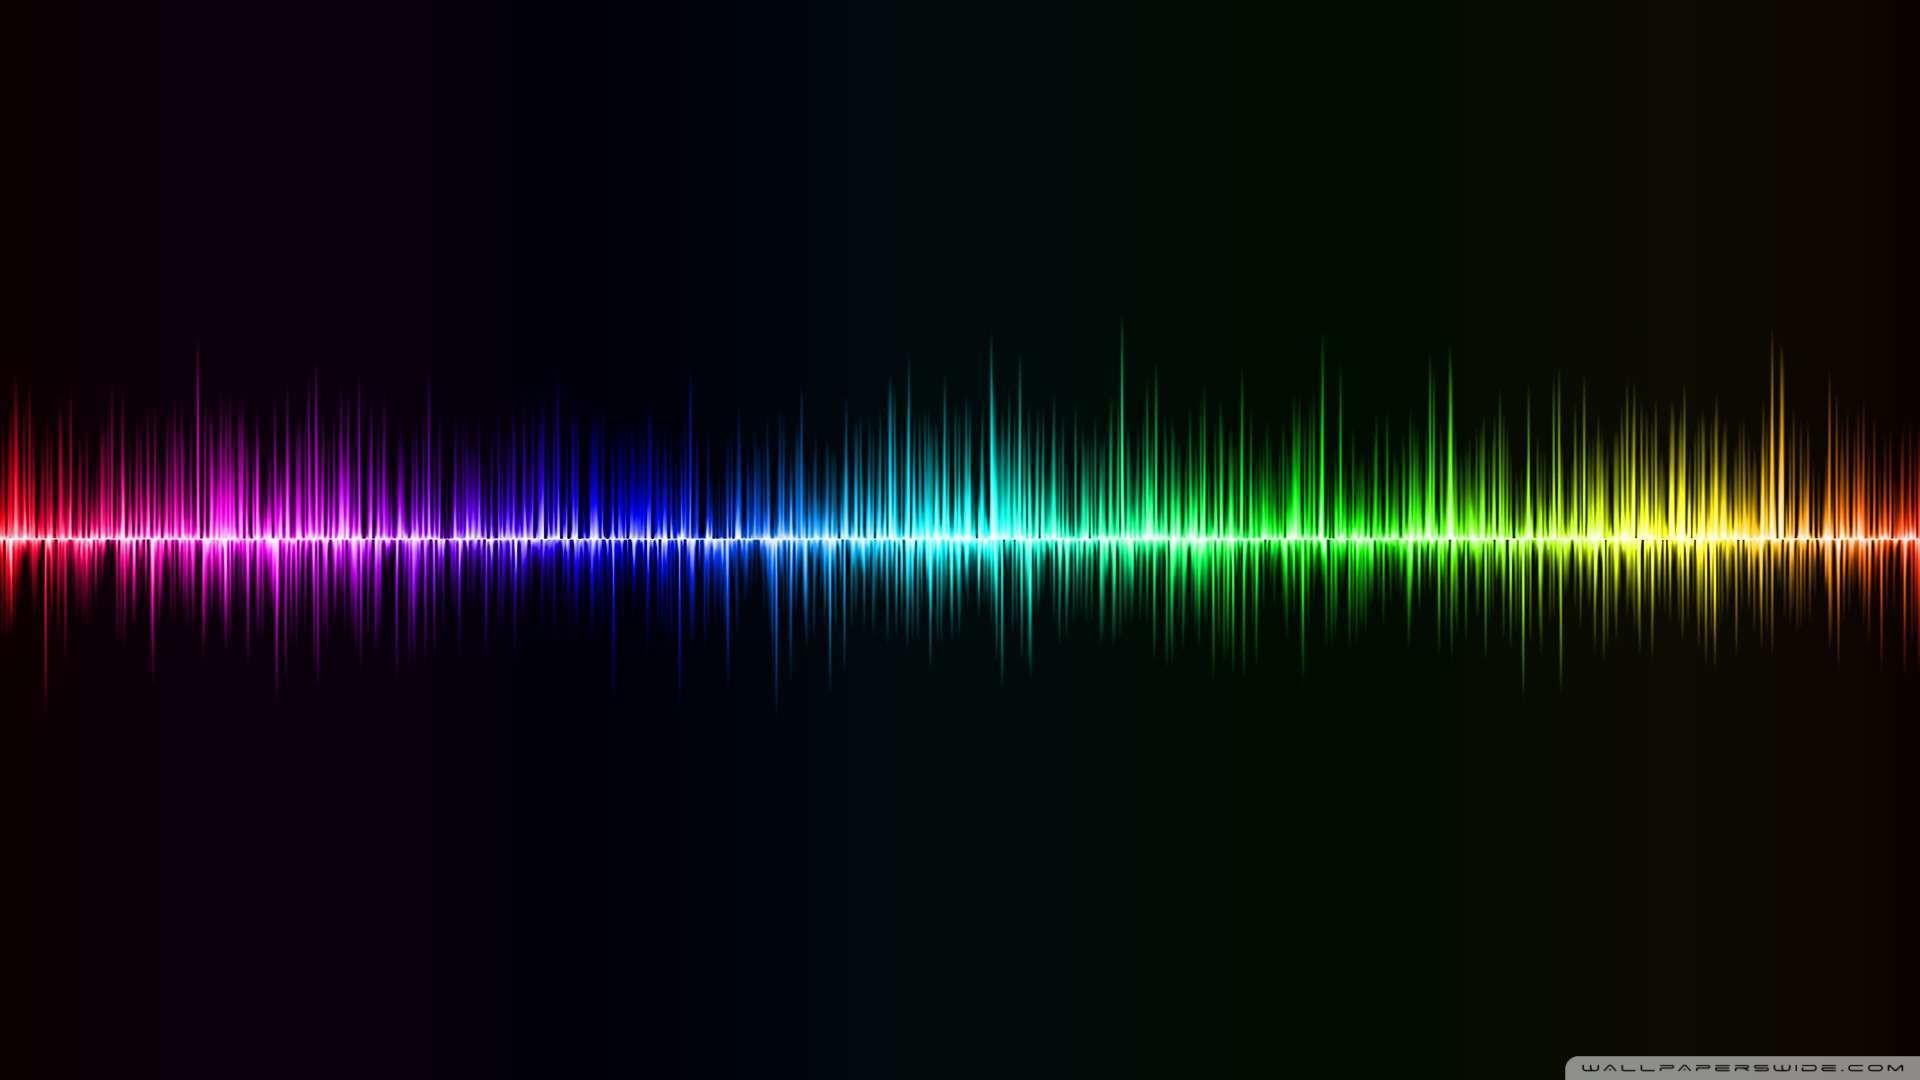 Download Sound Wave Wallpaper 1080p Hd At 1920 X 1080 - 2048 Pixels Wide And 1152 Pixels Tall Backgrounds - HD Wallpaper 